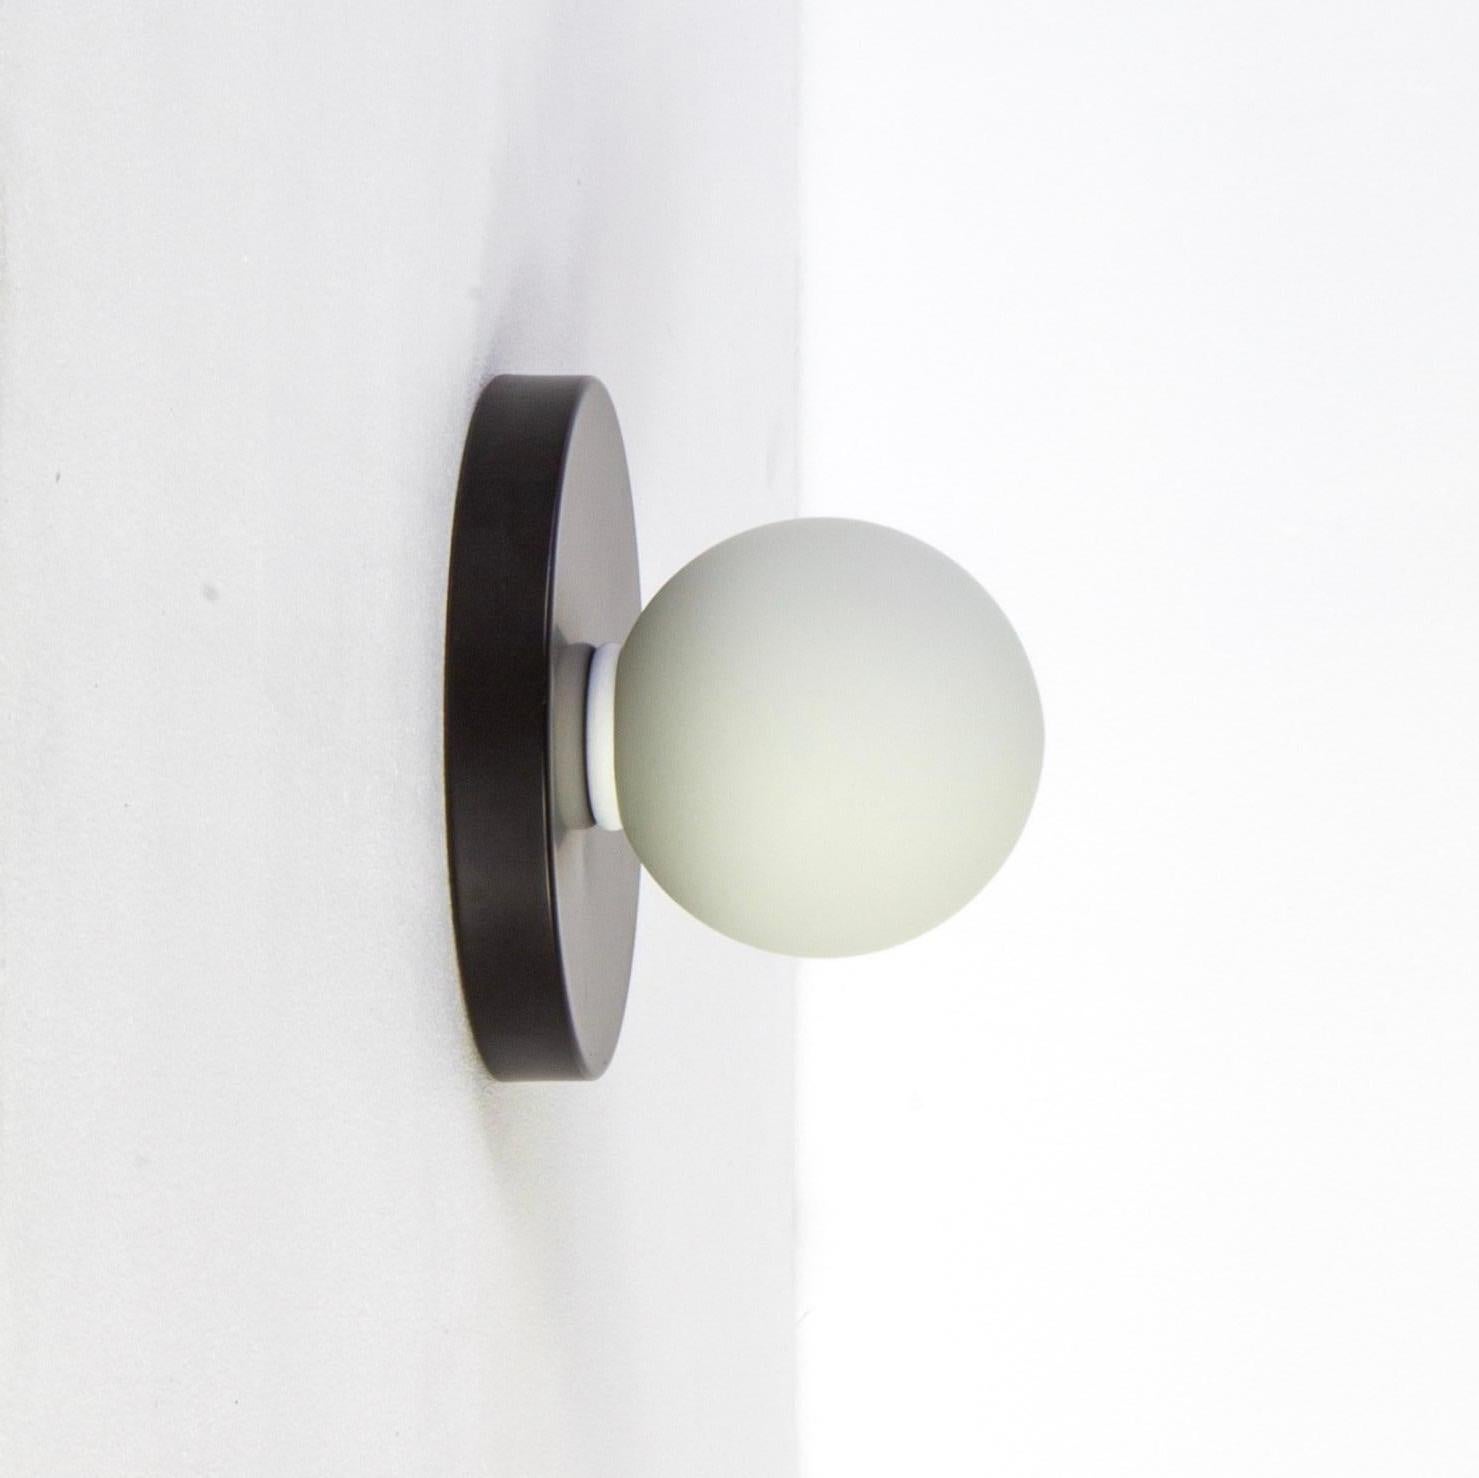 This listing is for 1x Globe Sconce in black designed and manufactured by Research.Lighting.

Materials: Steel & Glass
Finish: Powder-coated steel 
Electronics: 1x G9 Socket, 1x 4.5 Watt LED Bulb (included), 450 Lumens
ADA Compliant. UL Listed. Made